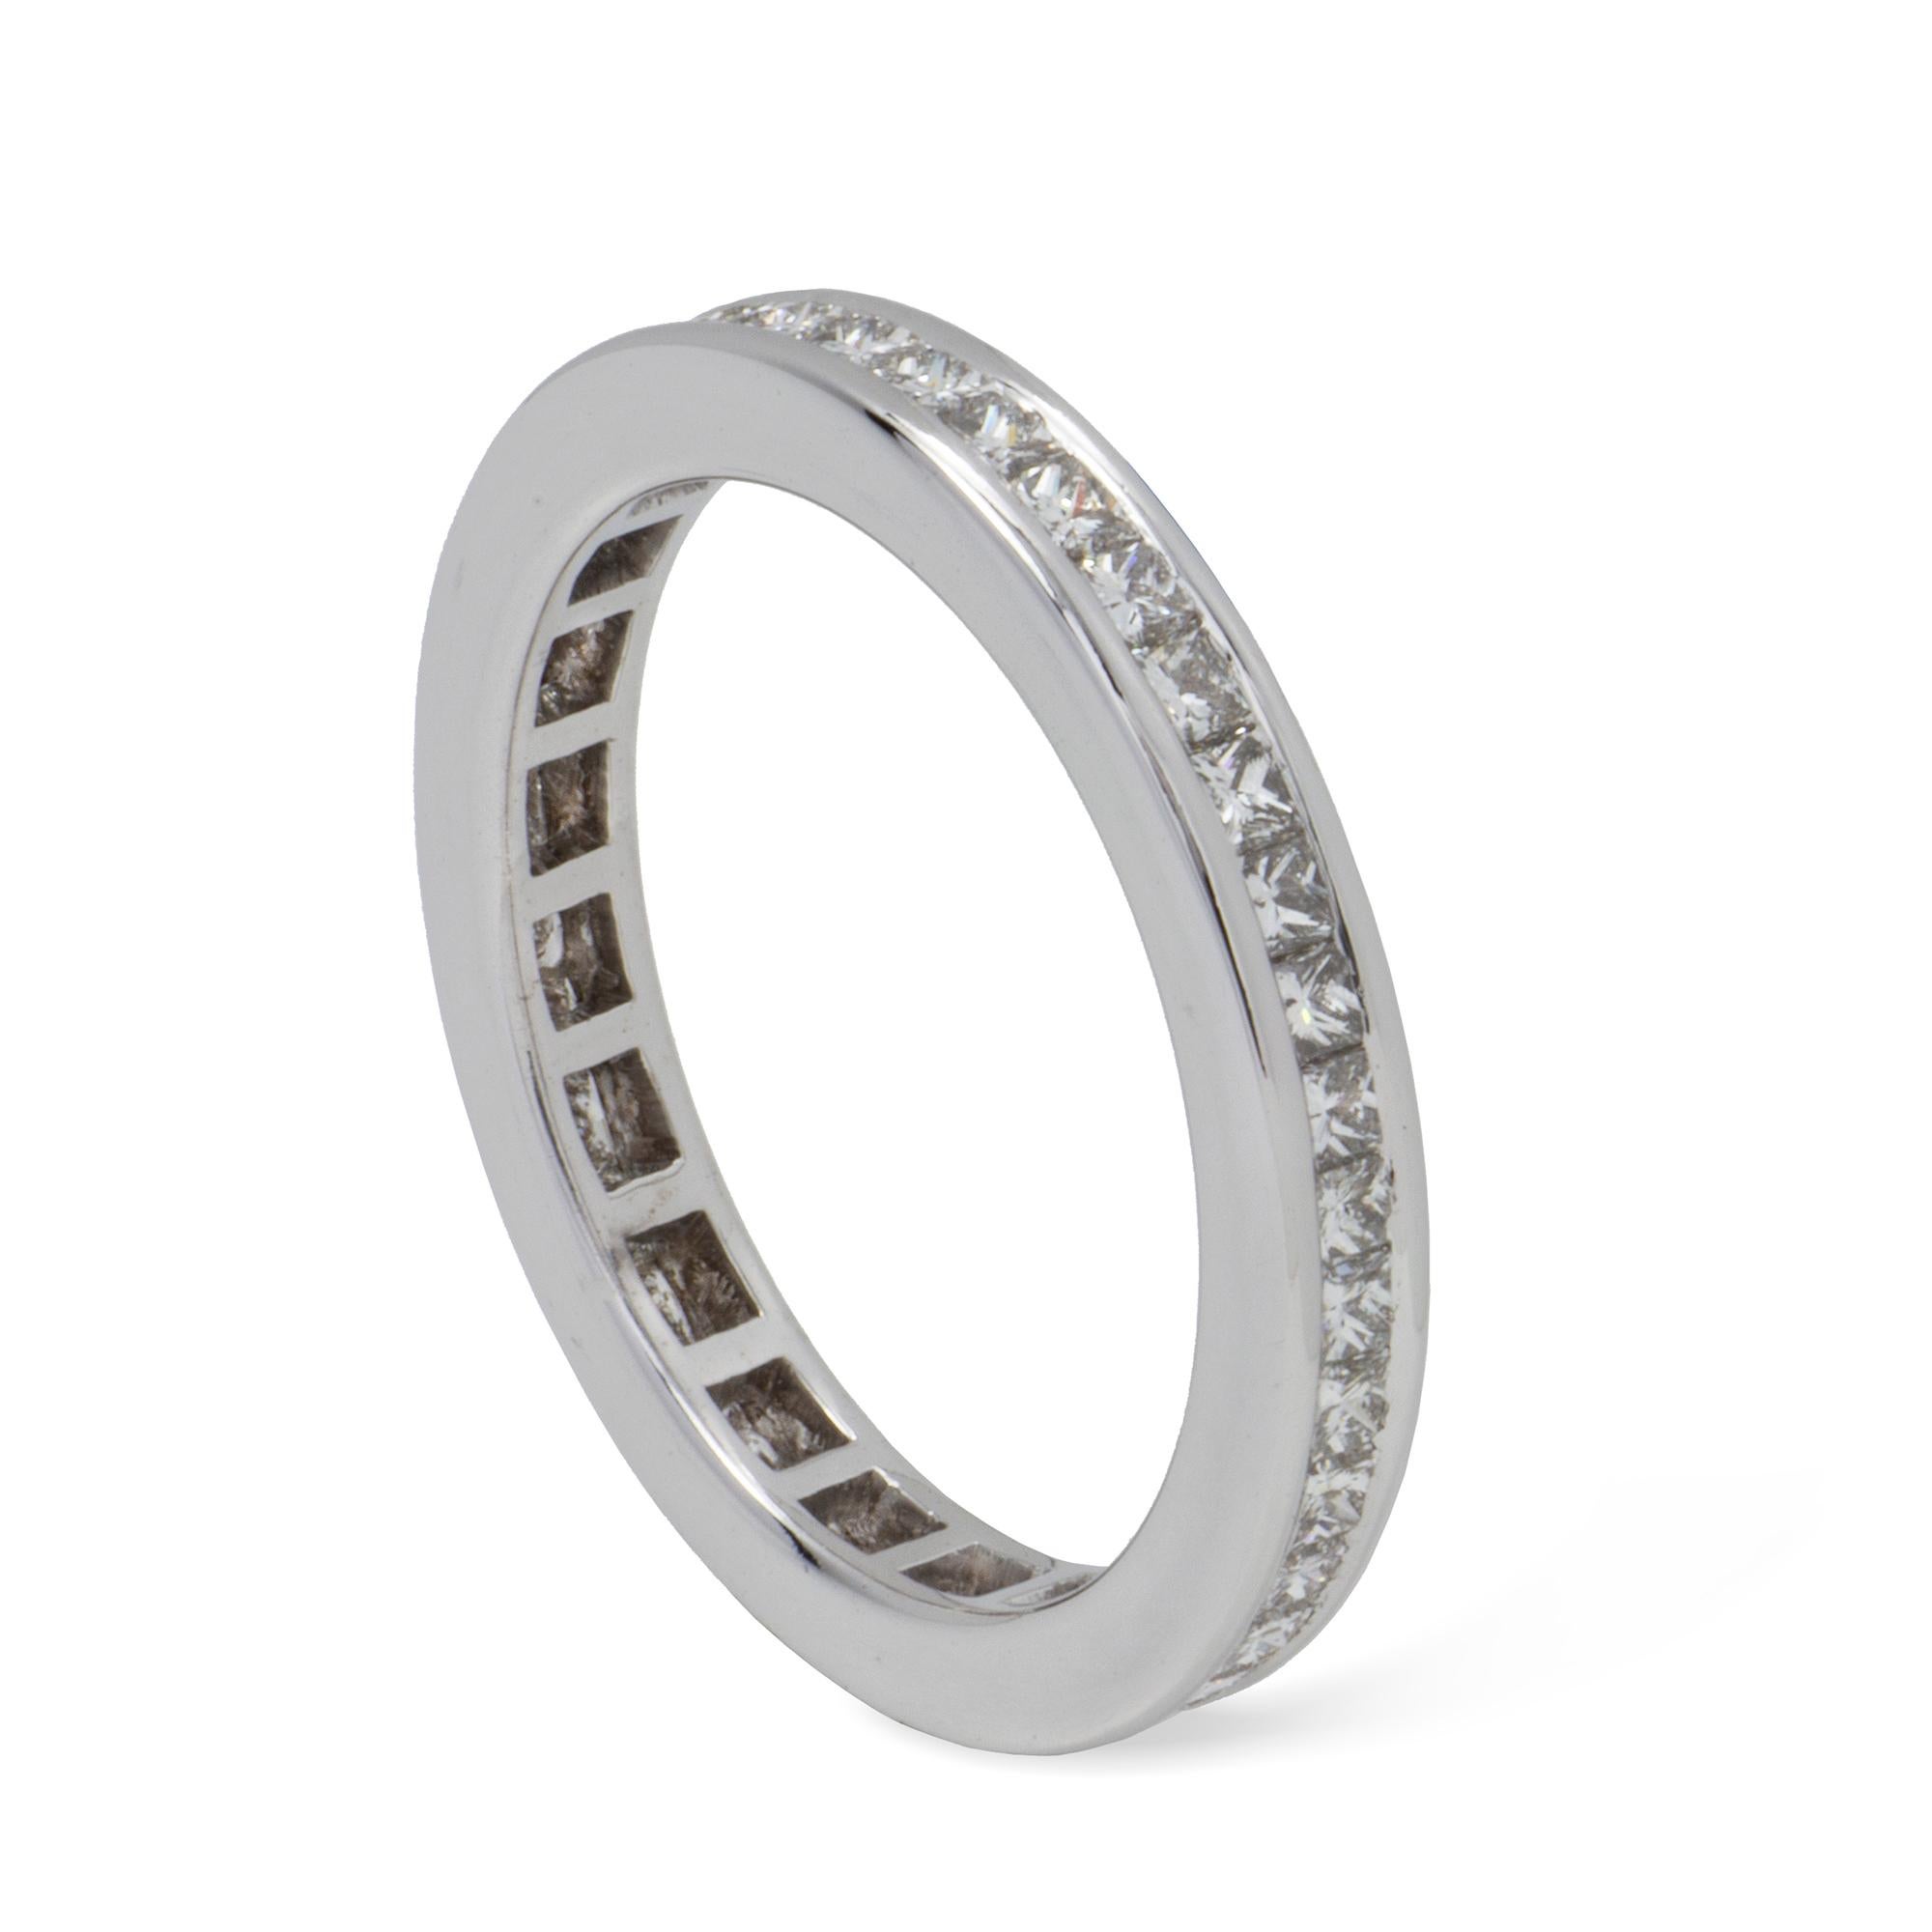 A diamond full eternity ring, set with forty one princess-cut diamonds estimate to weight a total of 1.4 carats in total, all channel set in white gold mount, hallmarked 18ct gold London 2013, width measuring 0.3cm, finger size L, gross weight 3.3